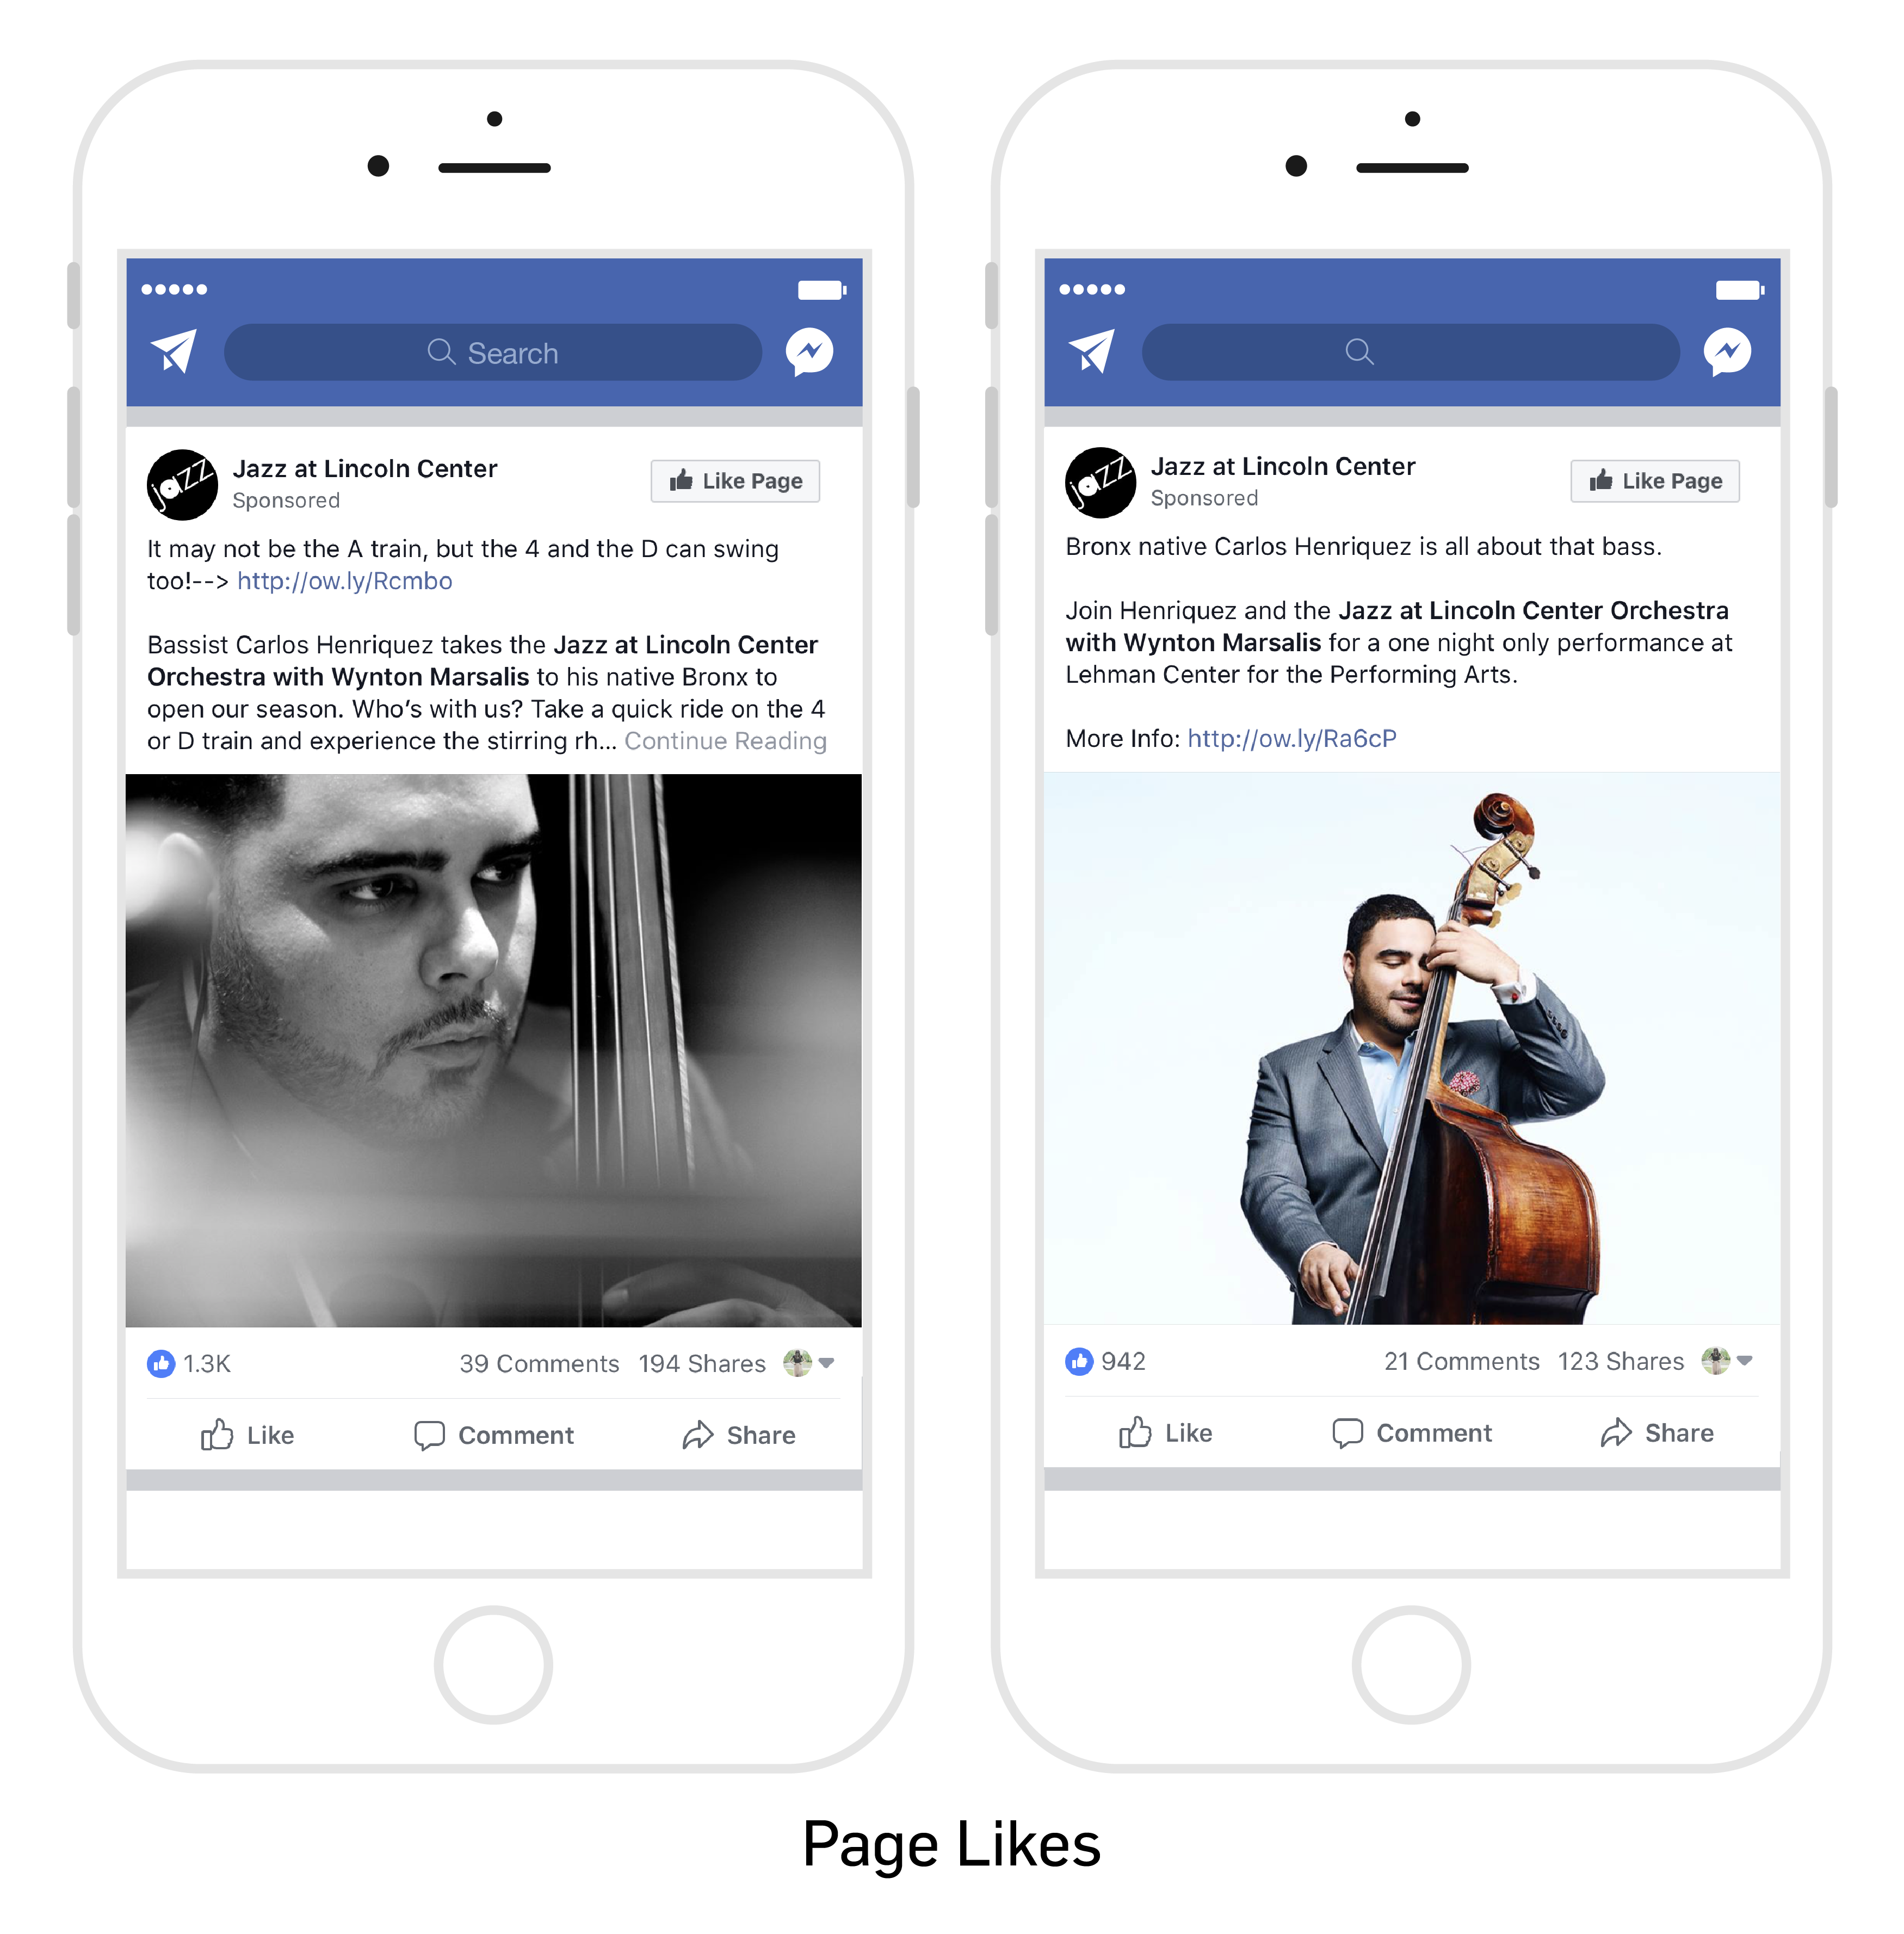 Image with mobile phone examples of "Page Likes"